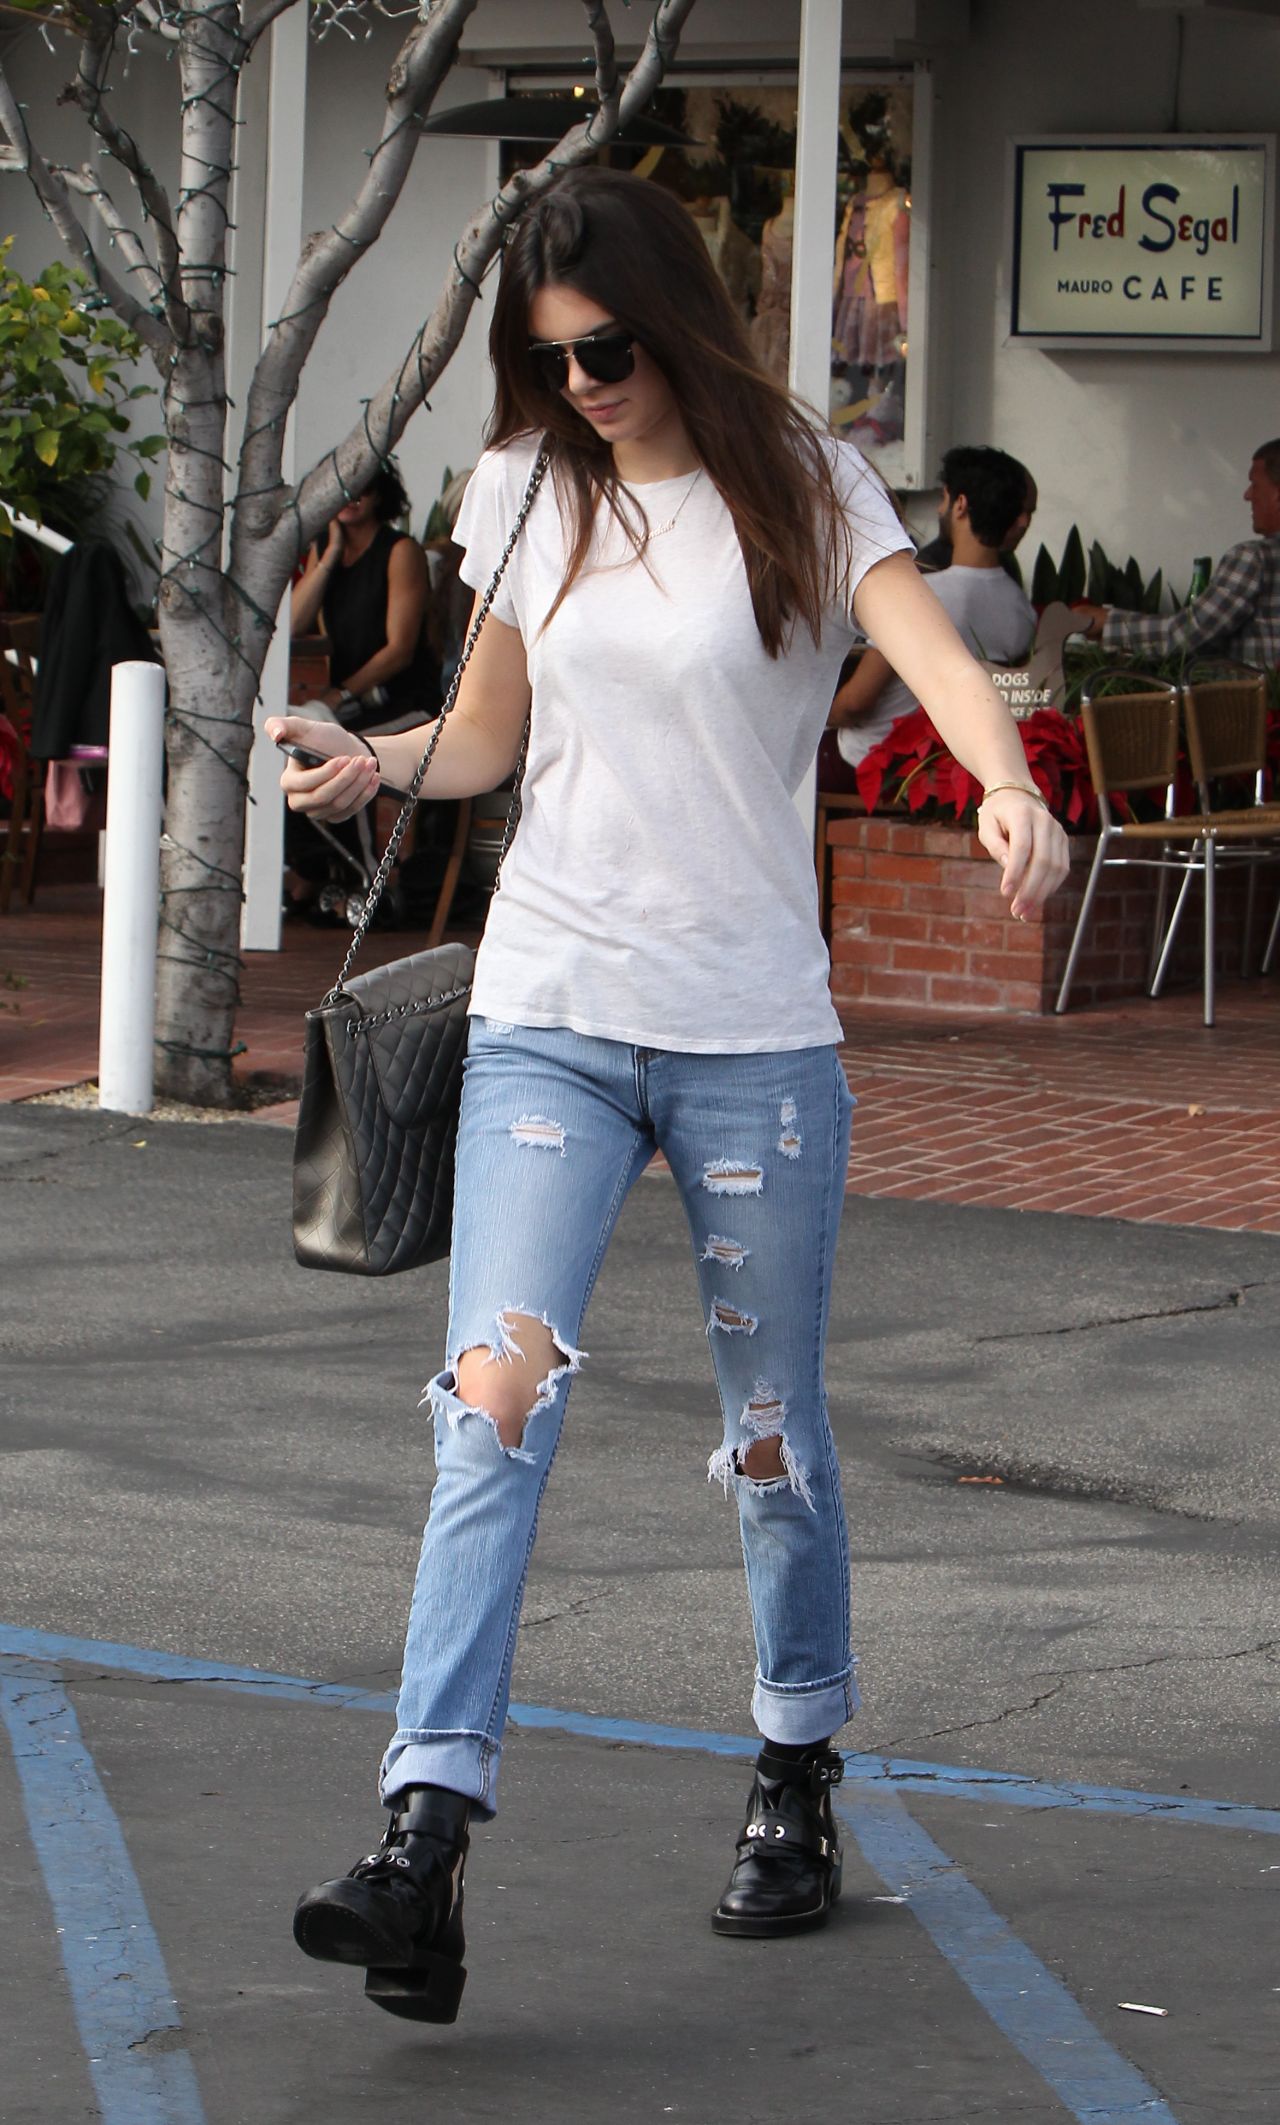 Kendall Jenner West Hollywood October 3, 2020 – Star Style